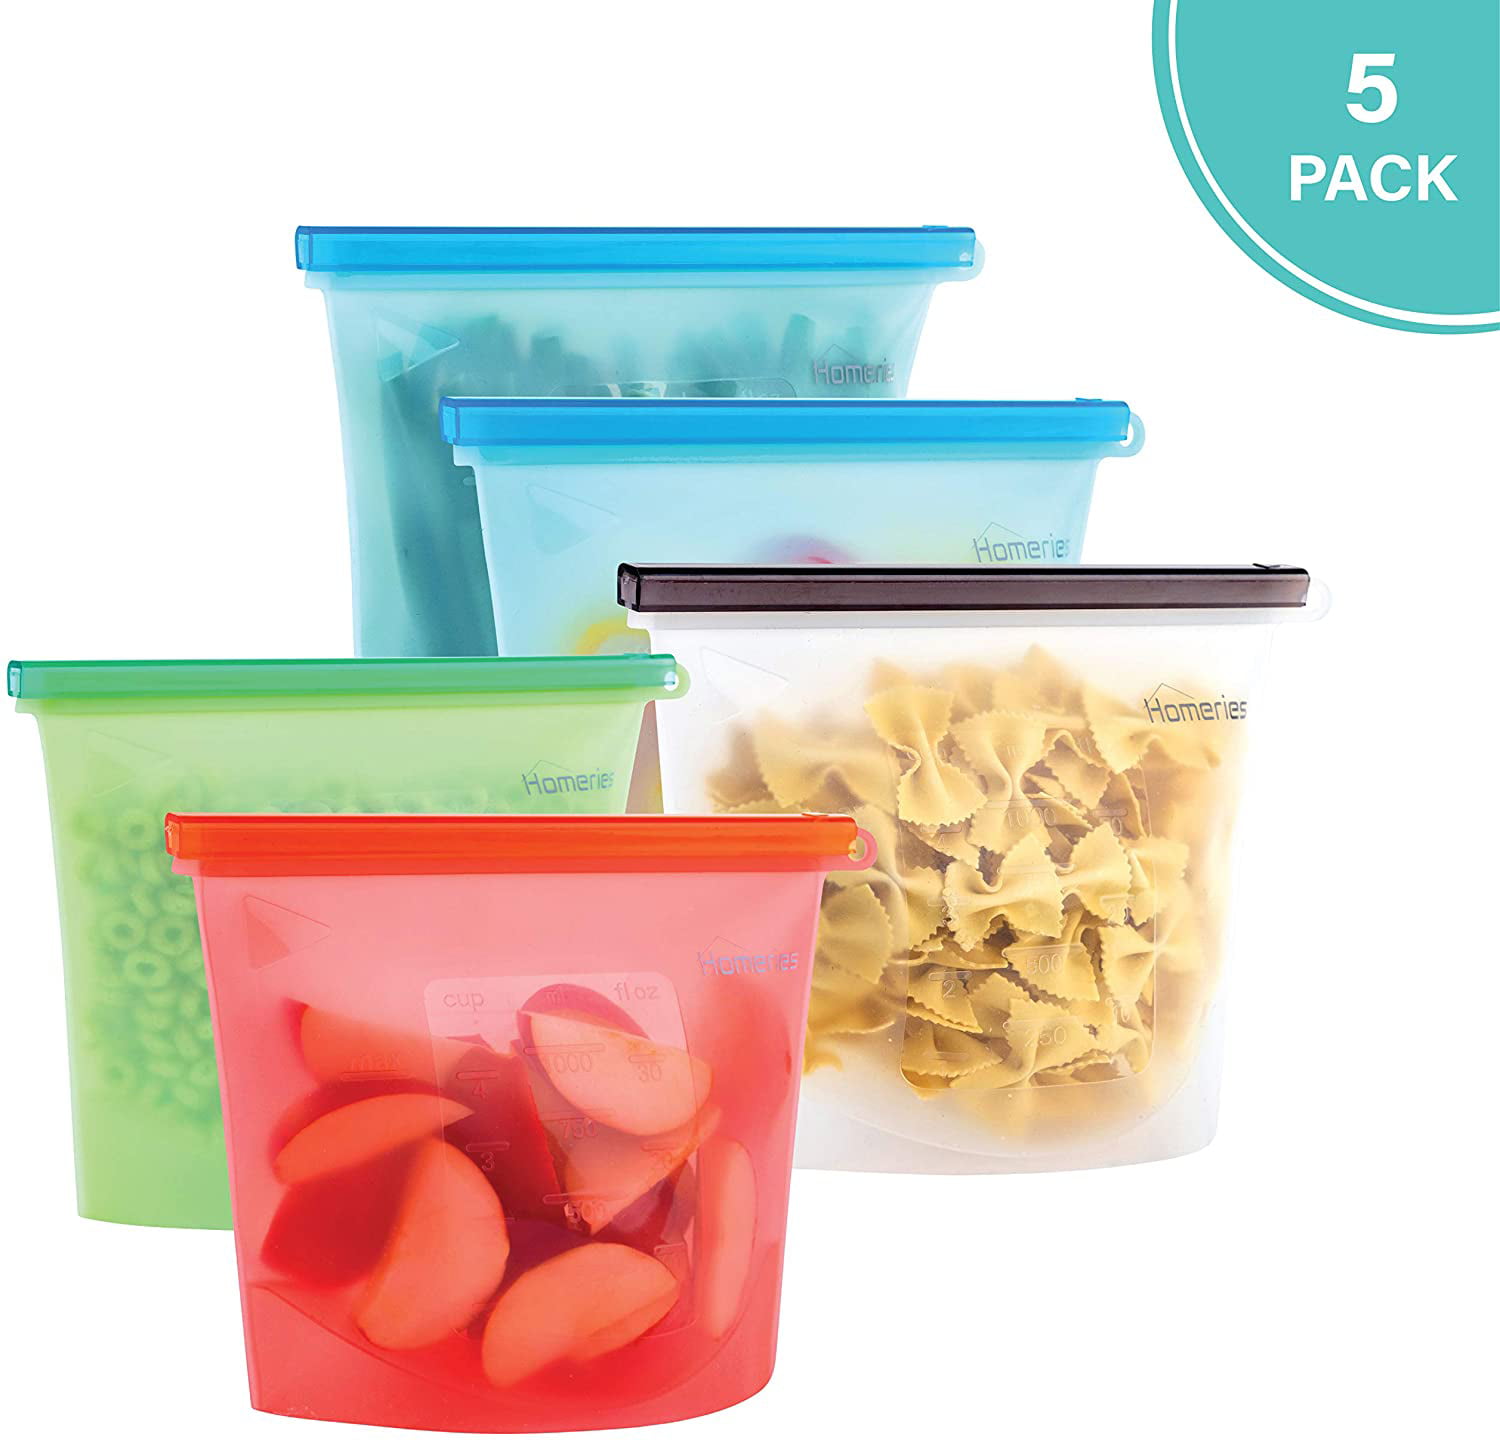 Reusable Silicone Food Storage Bags (5 x Medium) for Sandwich, Snack,  Lunch, Vegetable, Fruit, Sous Vide, Liquid | Airtight, BPA-Free, Leakproof  & Eco